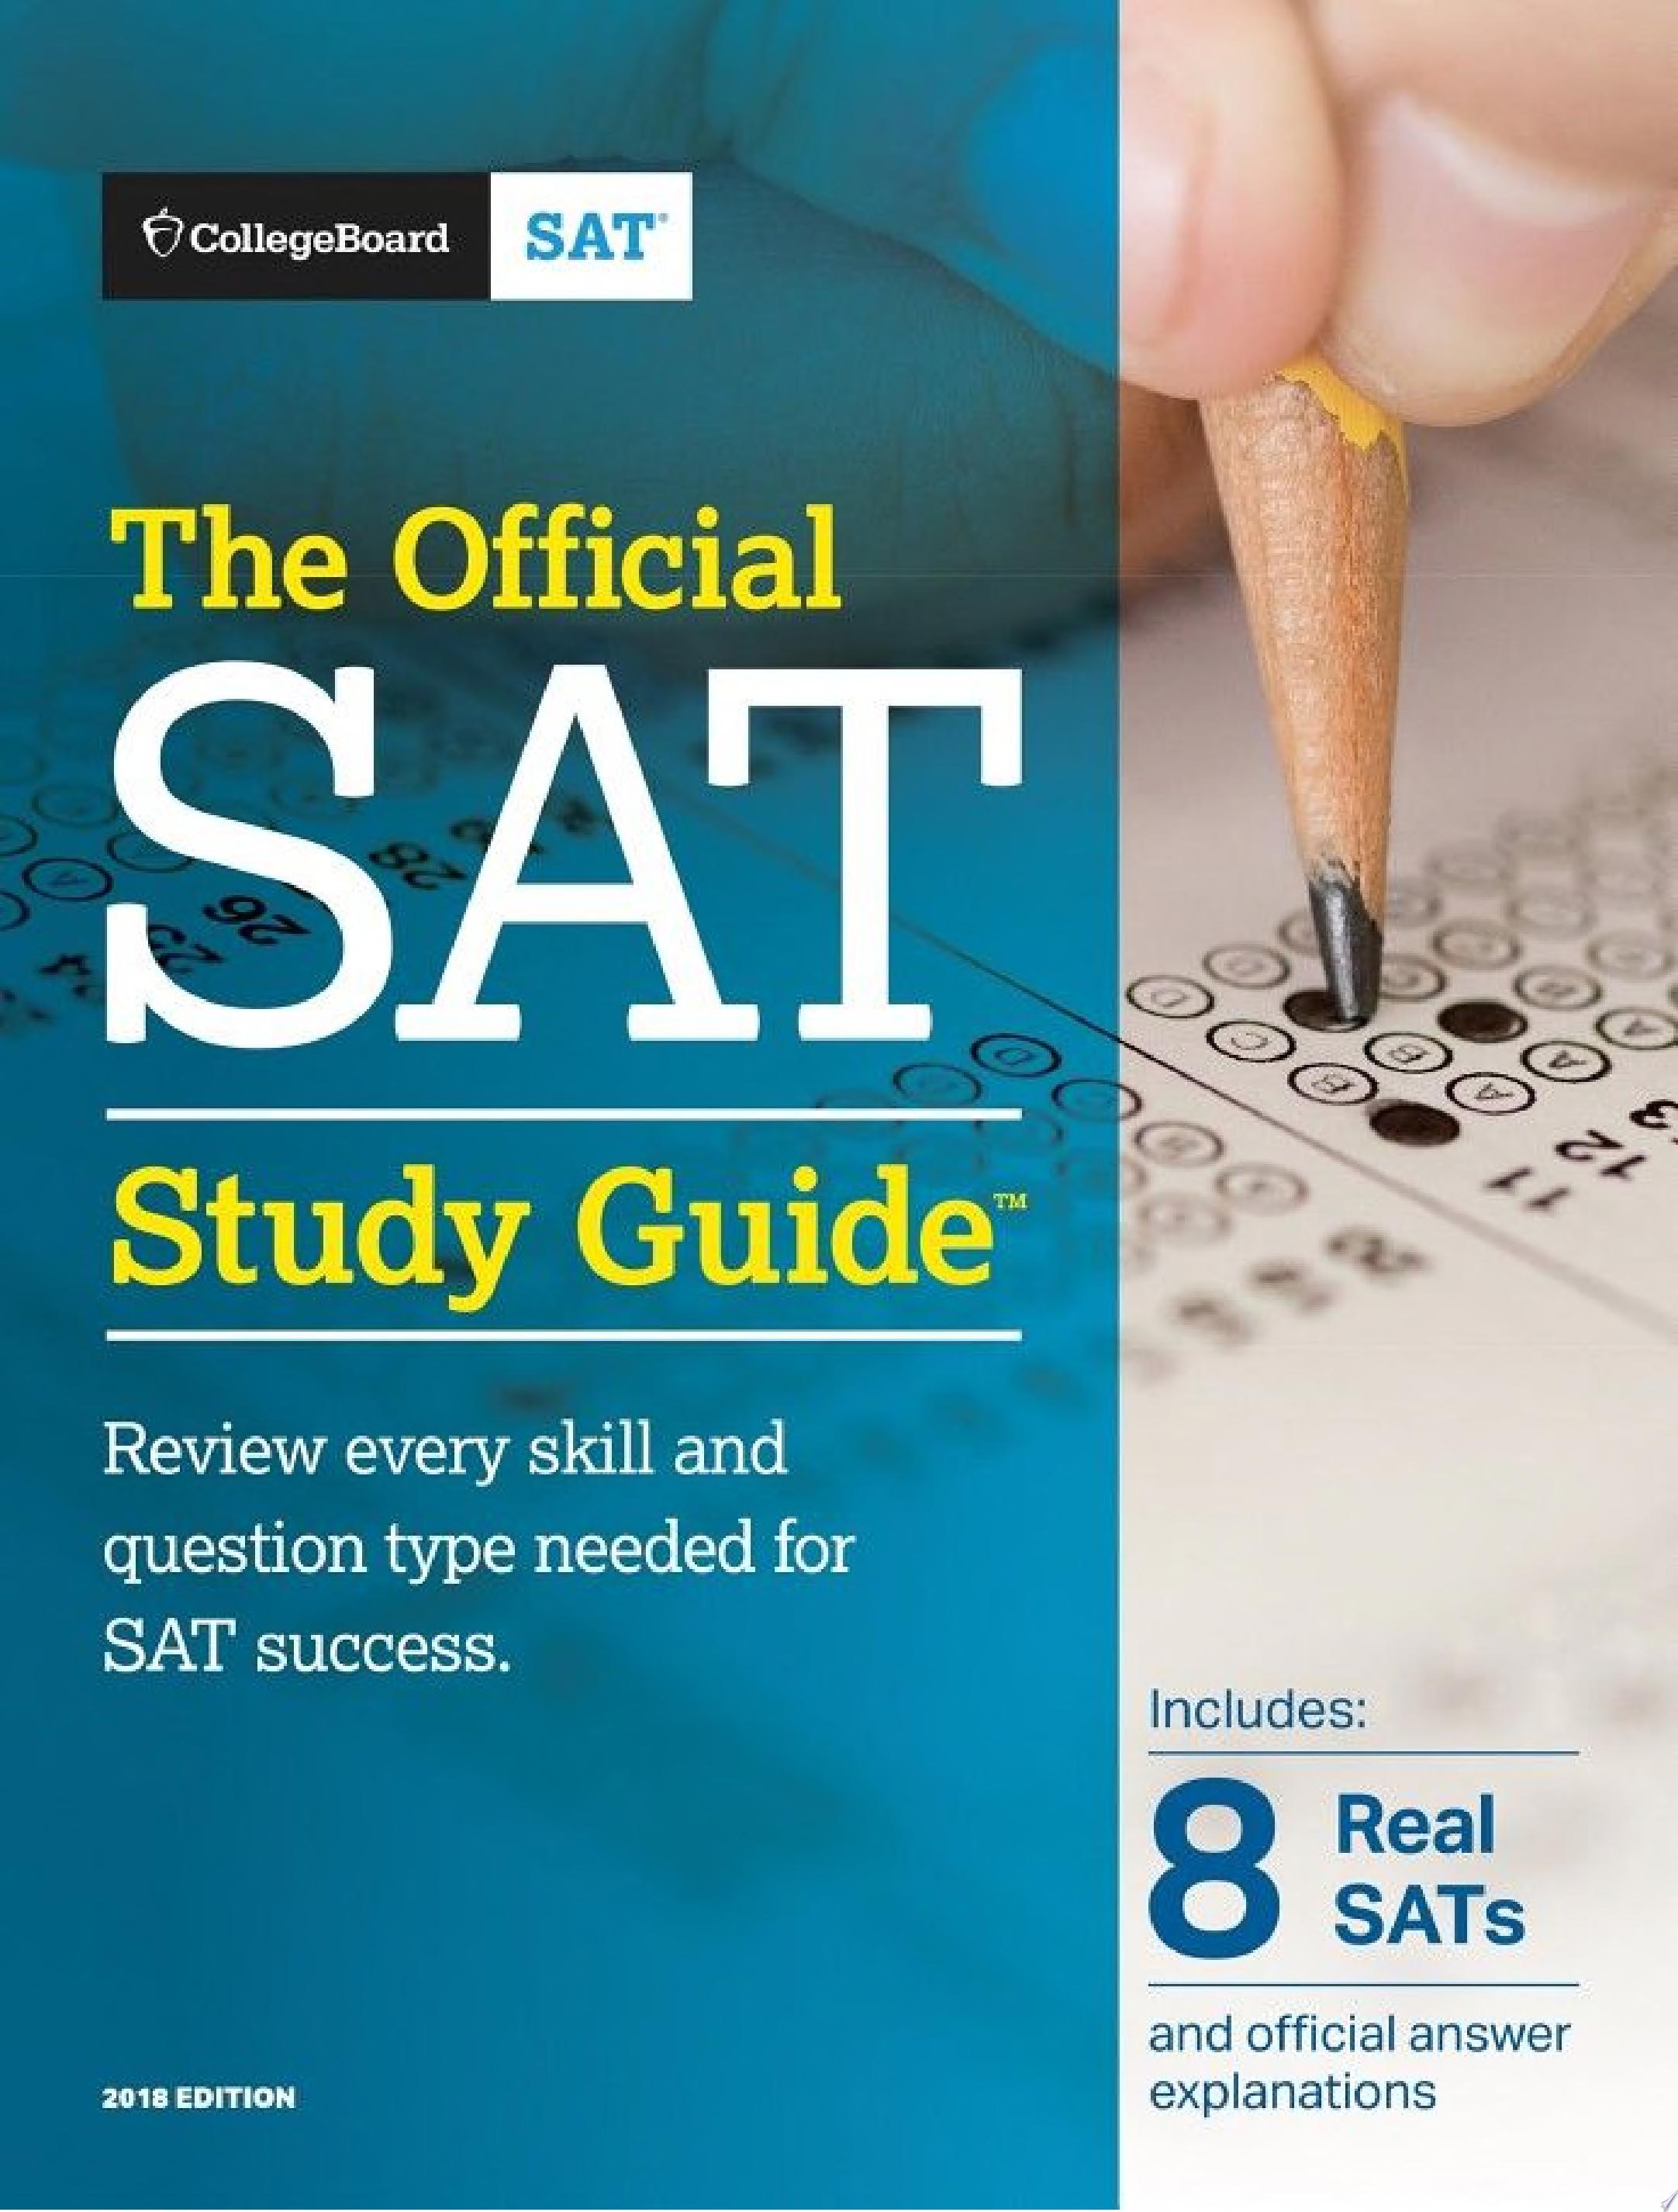 Image for "The Official SAT Study Guide, 2018 Edition"